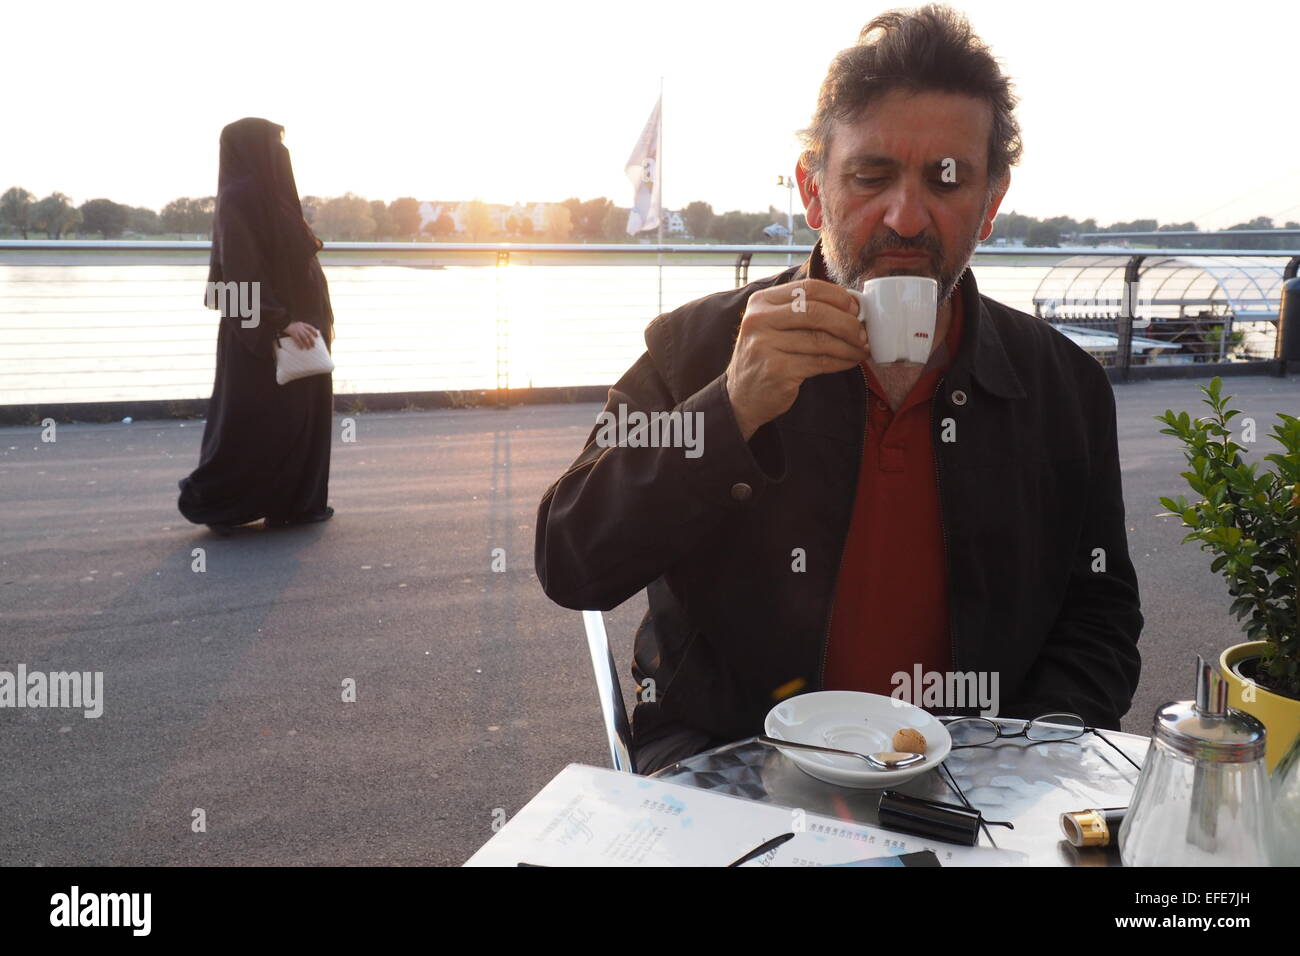 A middle aged man drinking a coffee, with a Muslim woman in traditional dress walking past in the background. Stock Photo